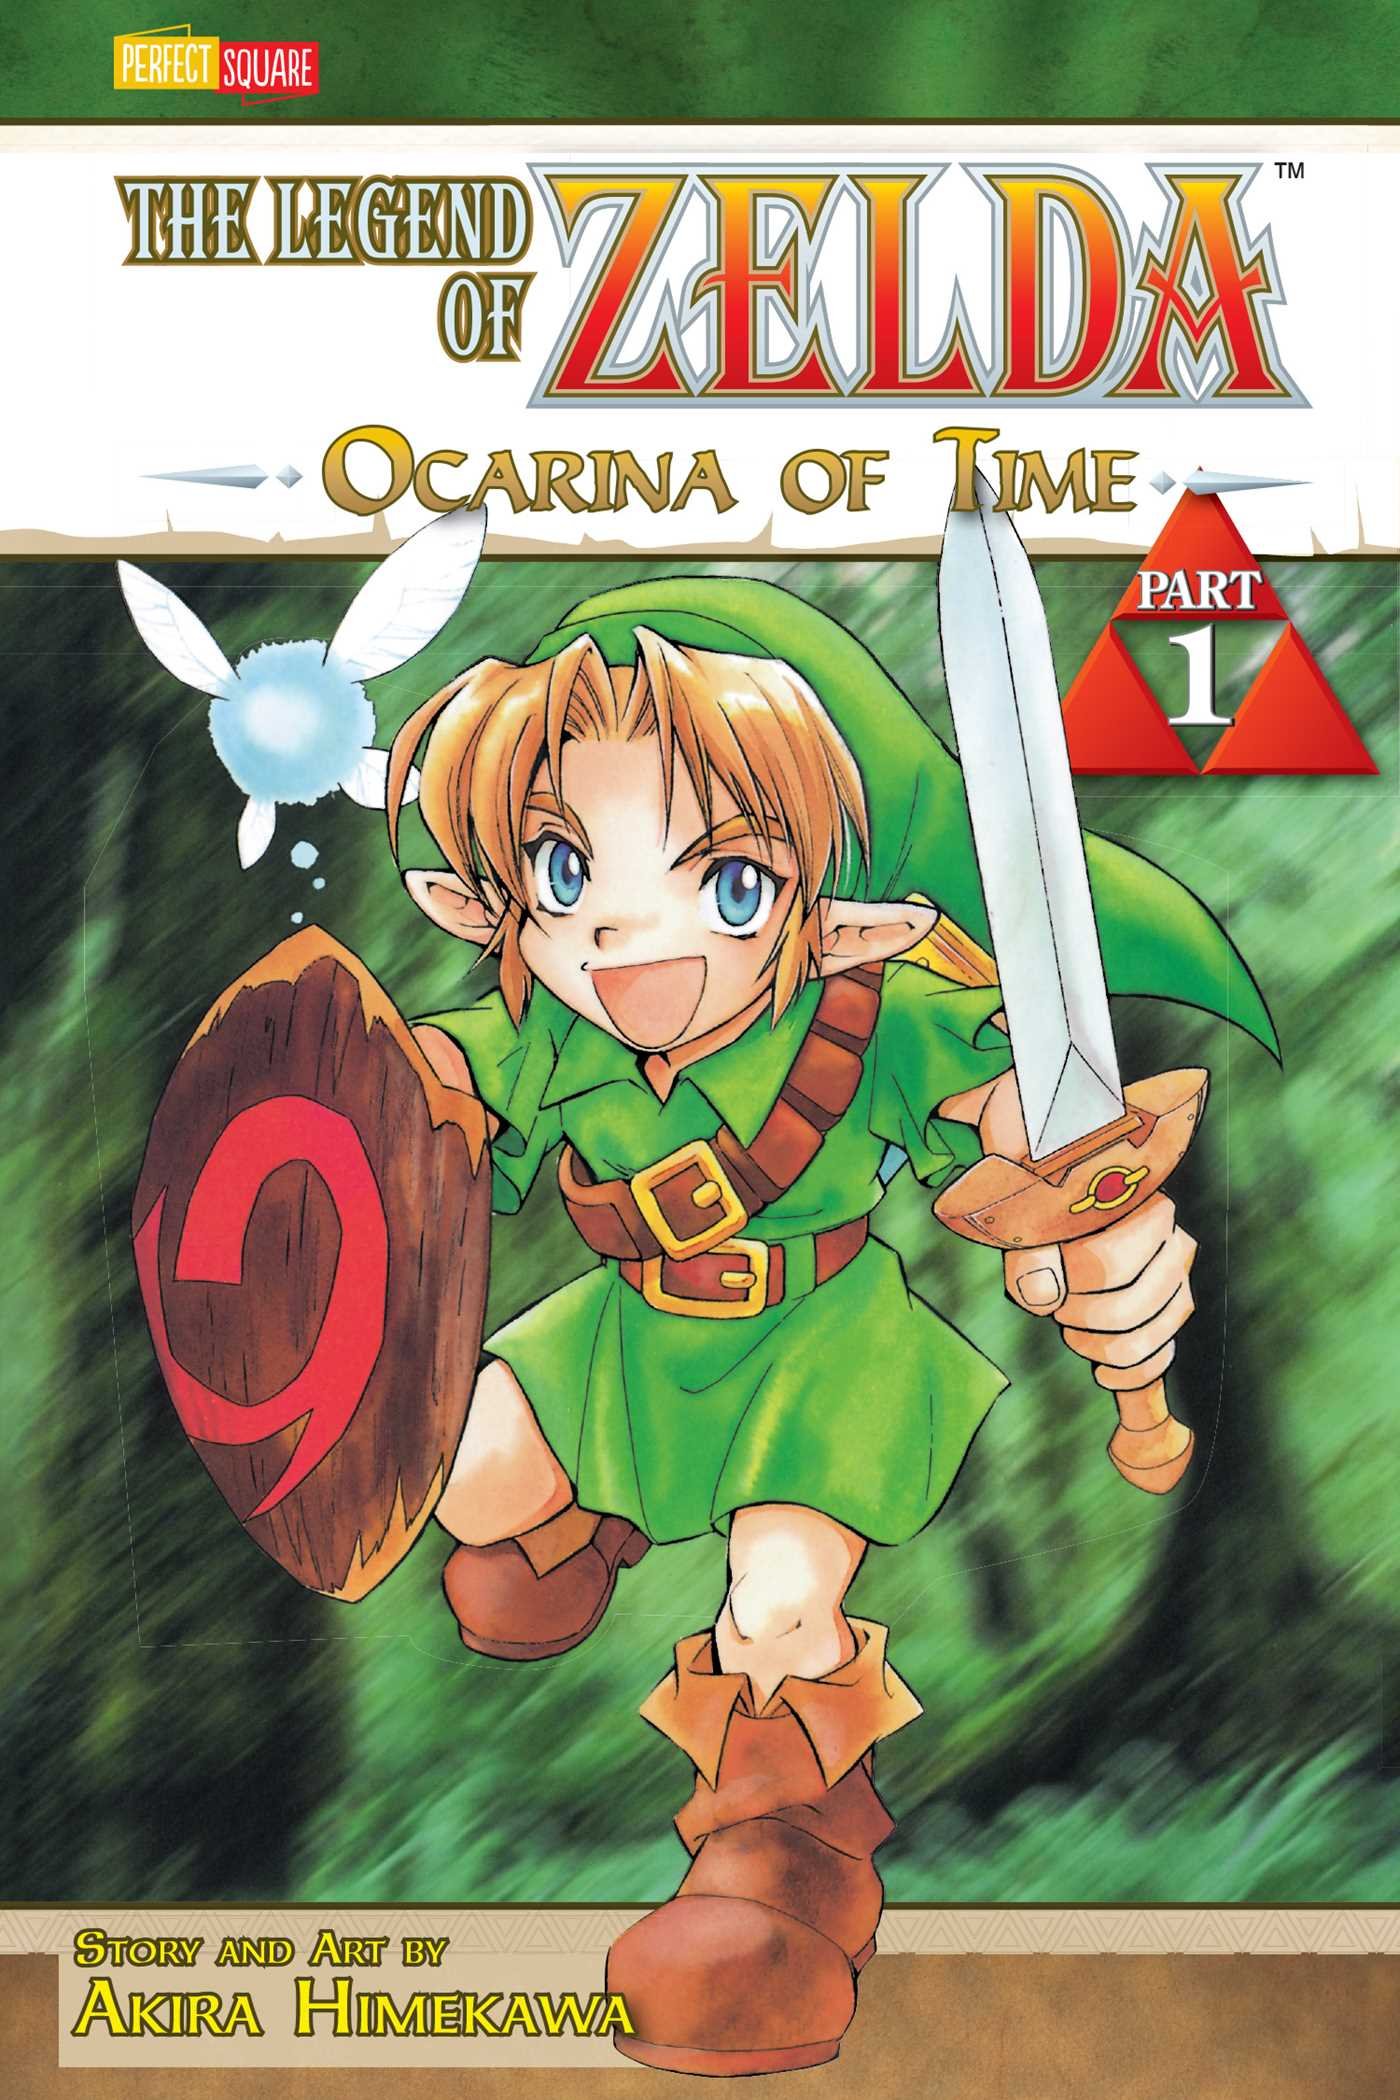 The Legend Of Zelda: Ocarina Of Time Backgrounds, Compatible - PC, Mobile, Gadgets| 1400x2100 px